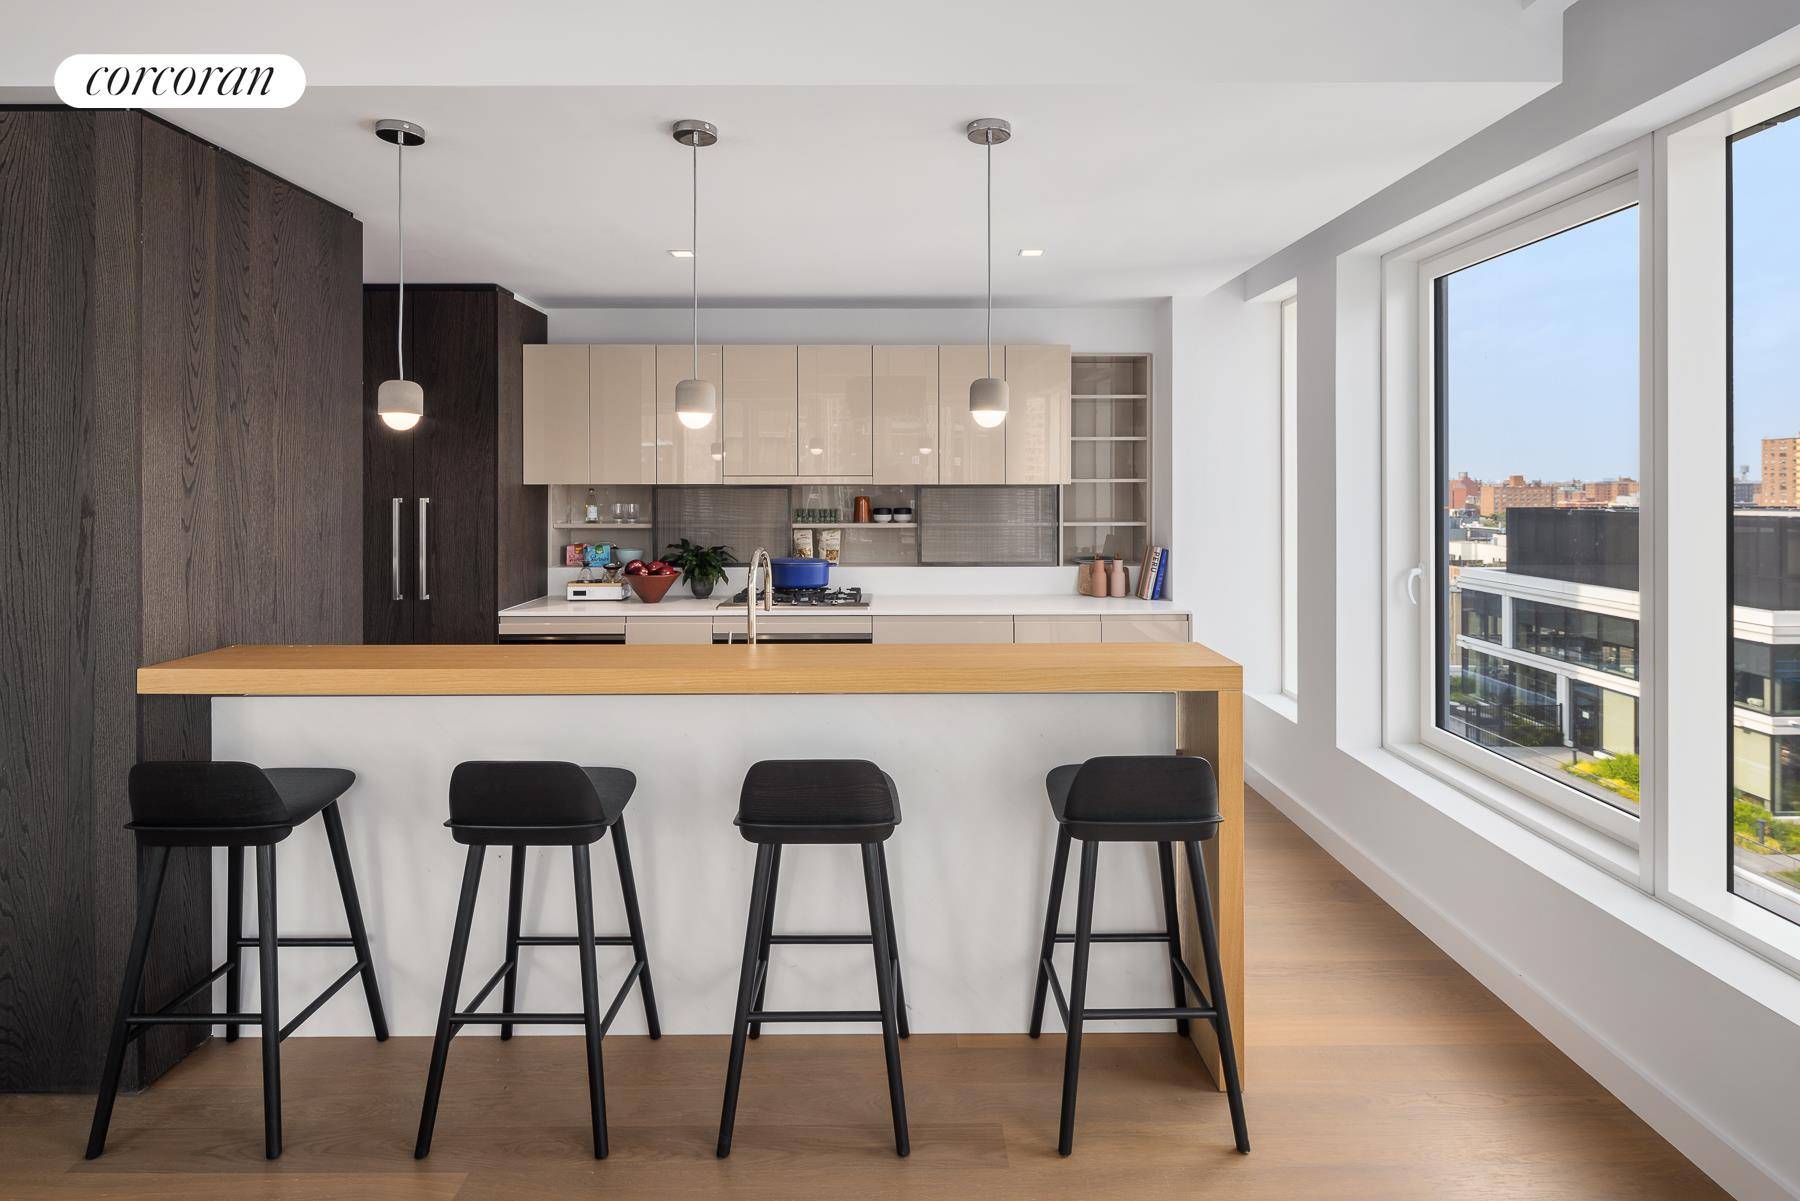 PRICE IMPROVEMENT FINAL OPPORTUNITIES ASK US ABOUT END OF YEAR PURCHASER INCENTIVES Sitting at the heart of this authentic and historic New York neighborhood One Essex Crossing is the premier ...